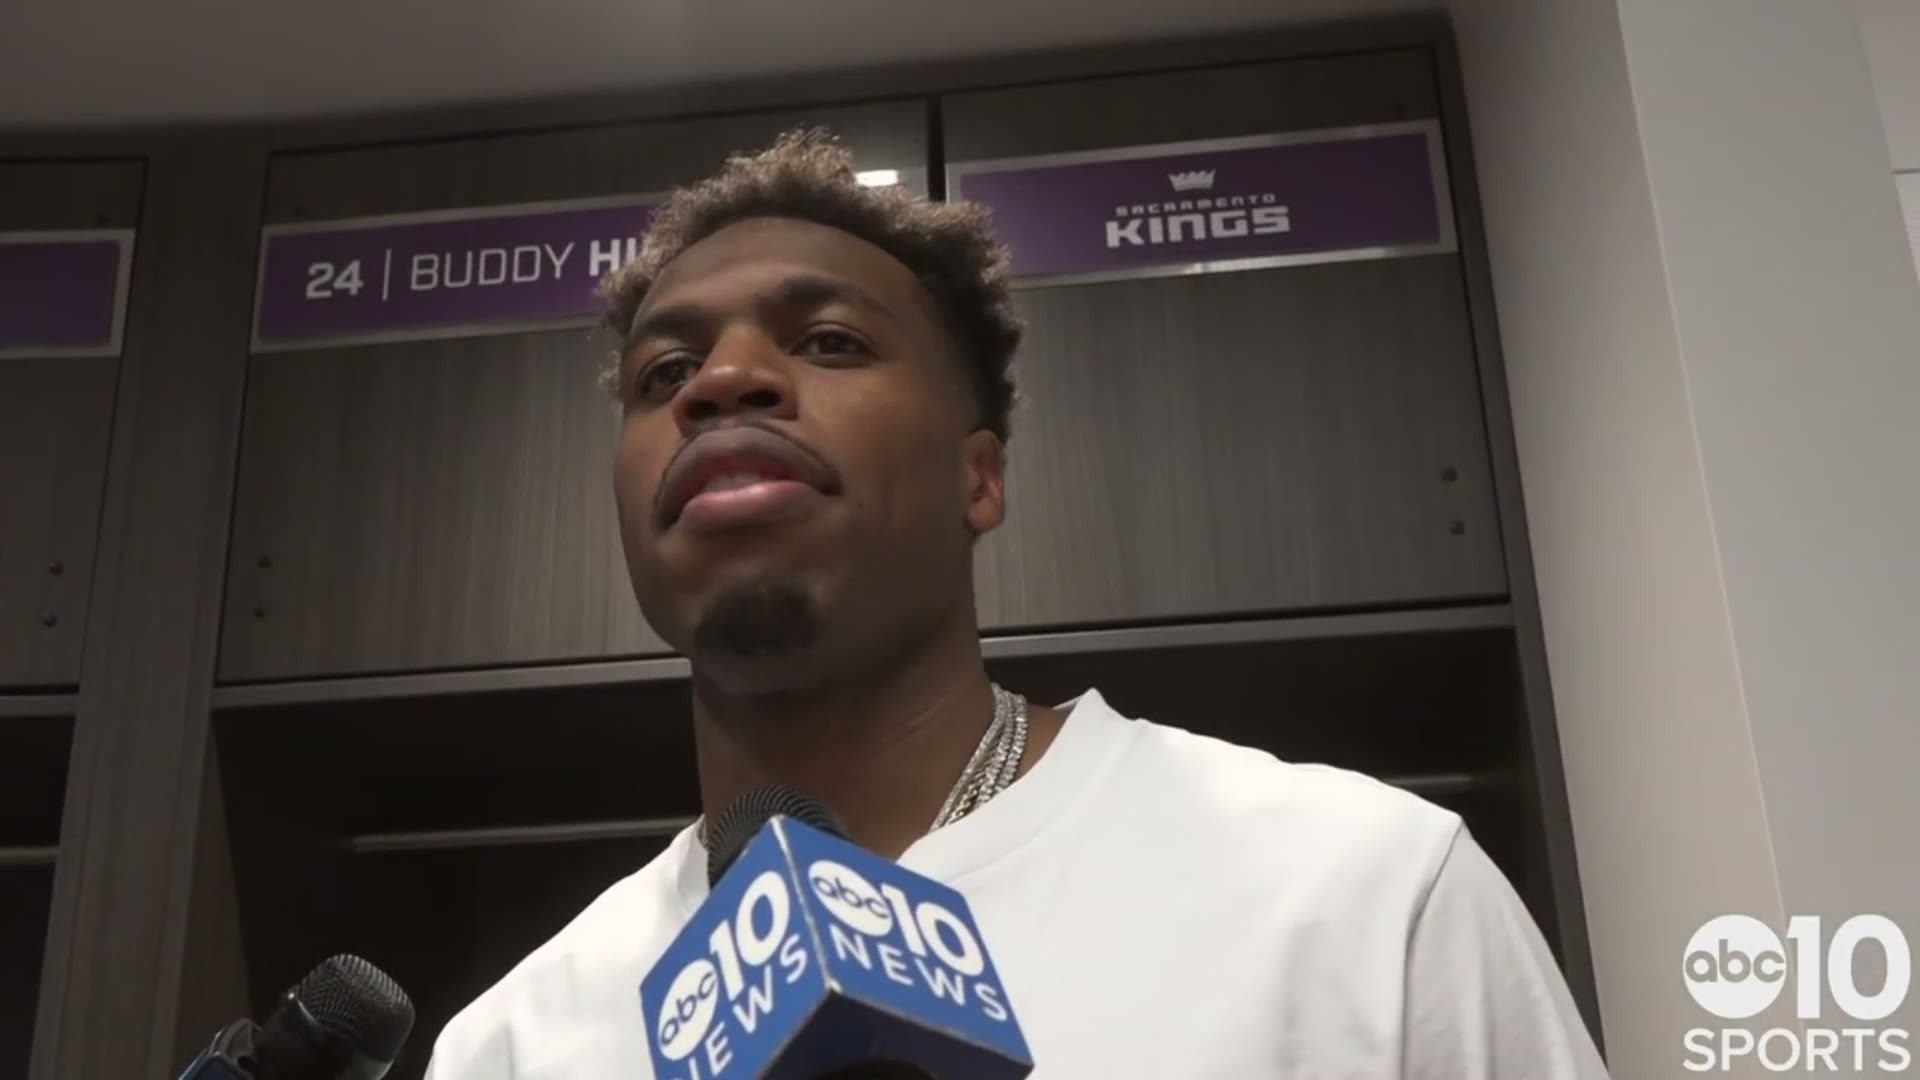 Kings shooting guard Buddy Hield discusses the team’s fifth straight loss to open the season after losing to the Charlotte Hornets.